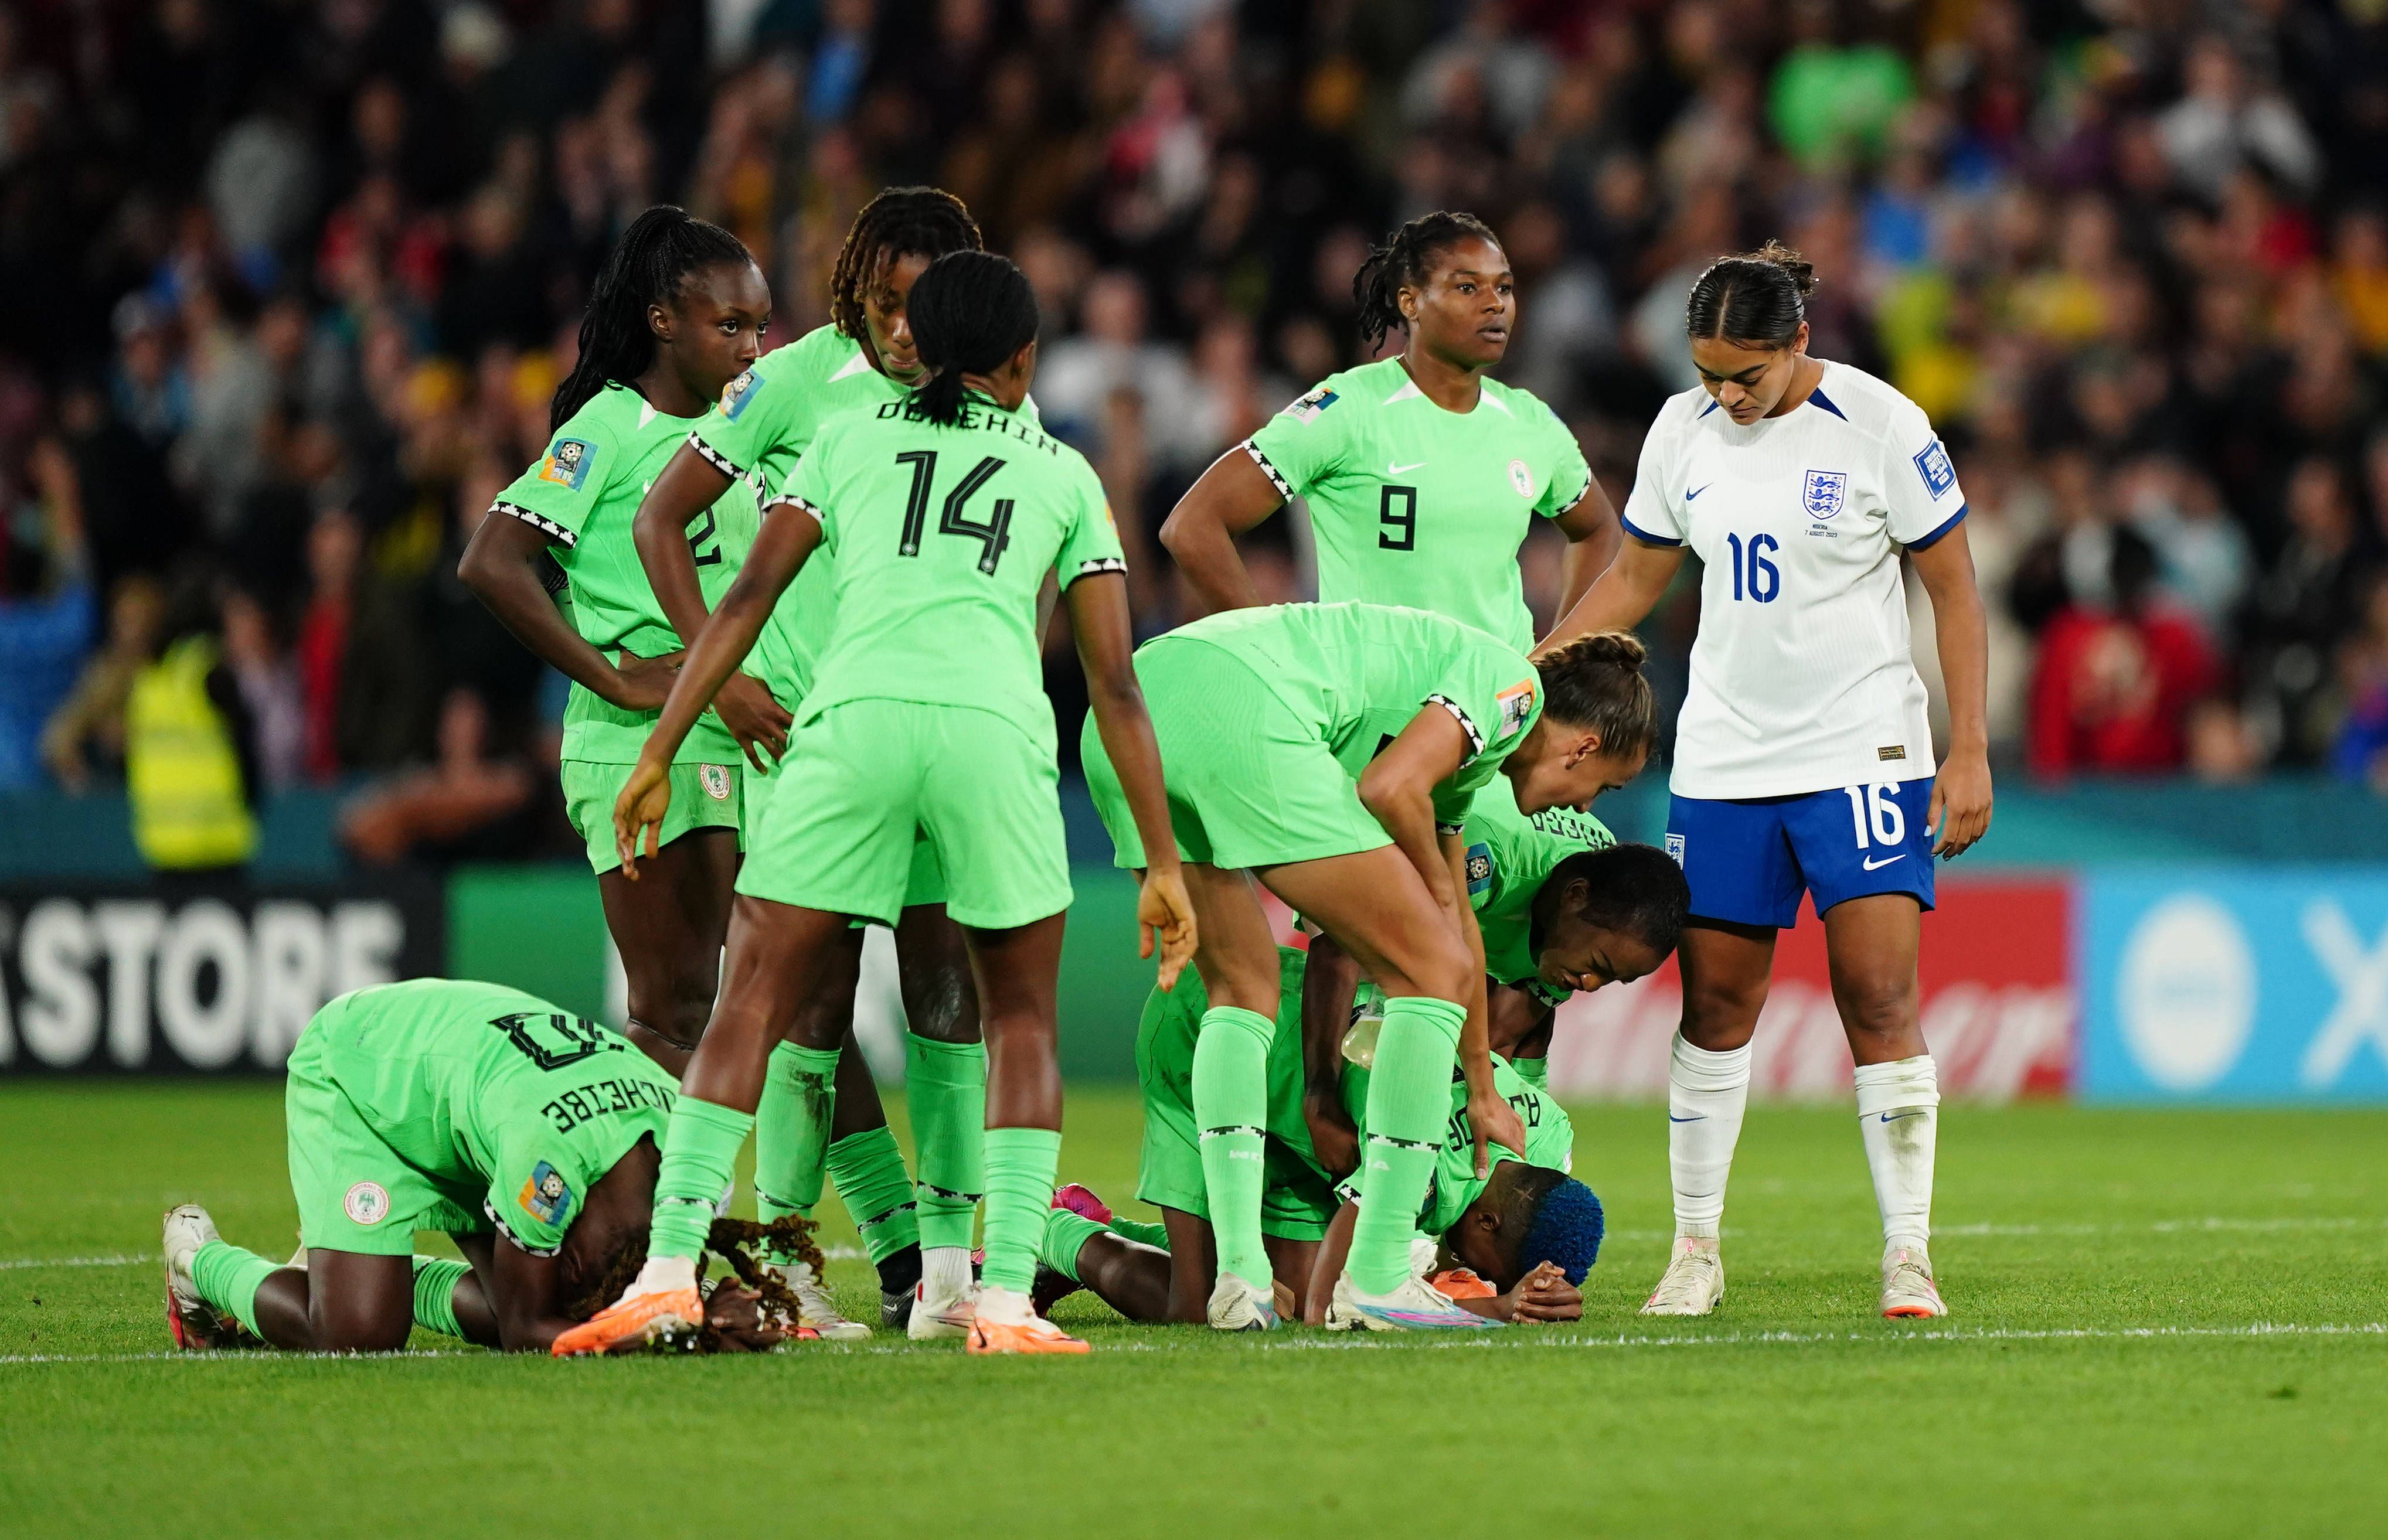 Super Falcons Fifa Ranks Nigeria 10th Best Team At 2023 Womens World Cup Fame Foundation